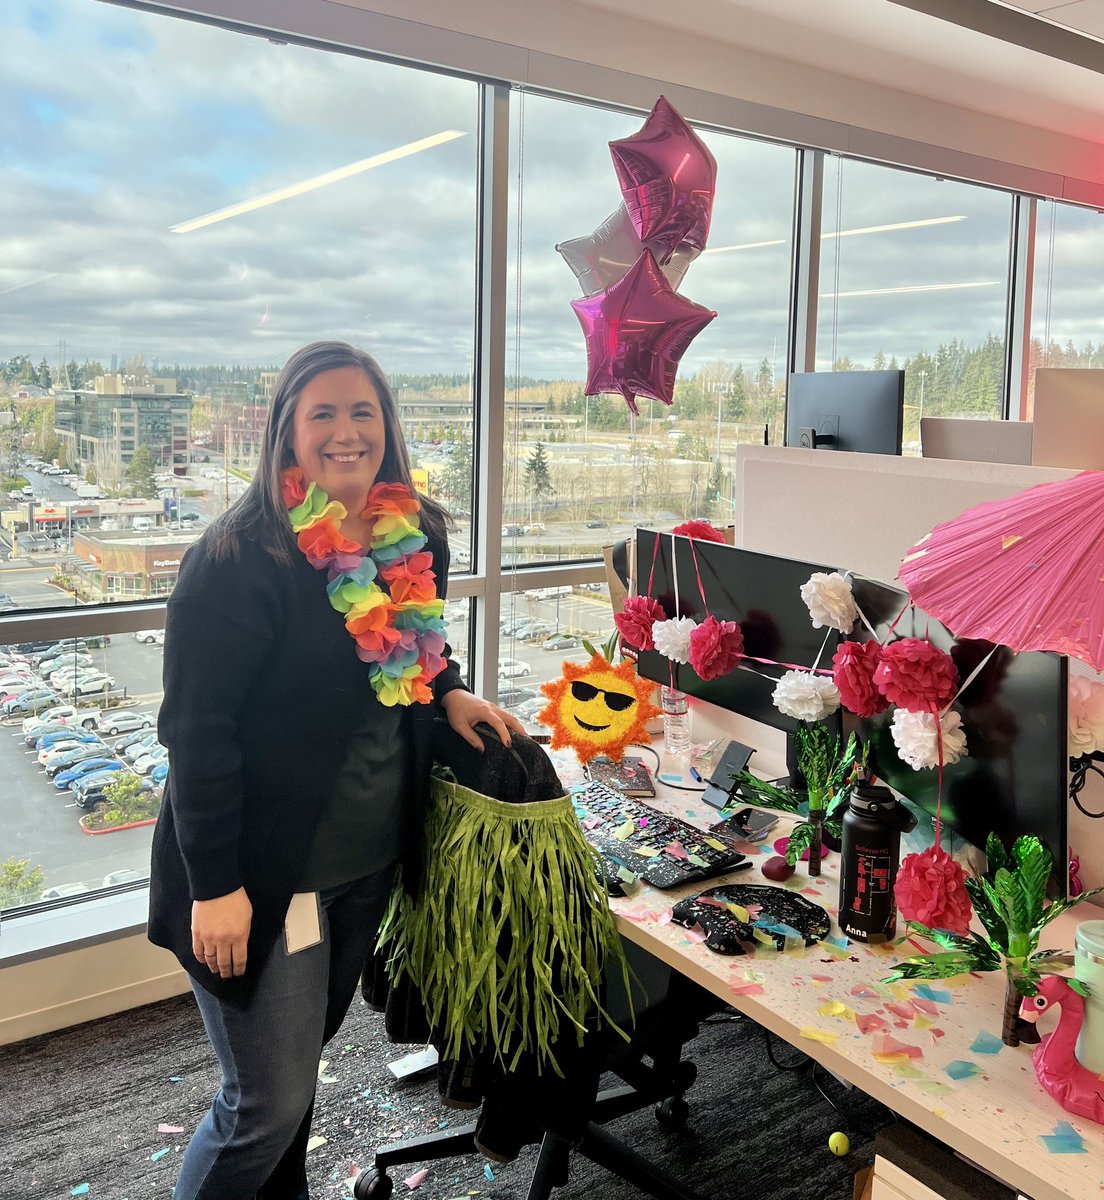 It’s PEAK WEEK at @TMobile and we love surprising our winners and celebrating their incredible contributions and leadership! Congratulations to @AnnieMLindner for winning this prestigious honor! She’s Maui bound!! 🕶️🌺🌈🍍#PEAK2023